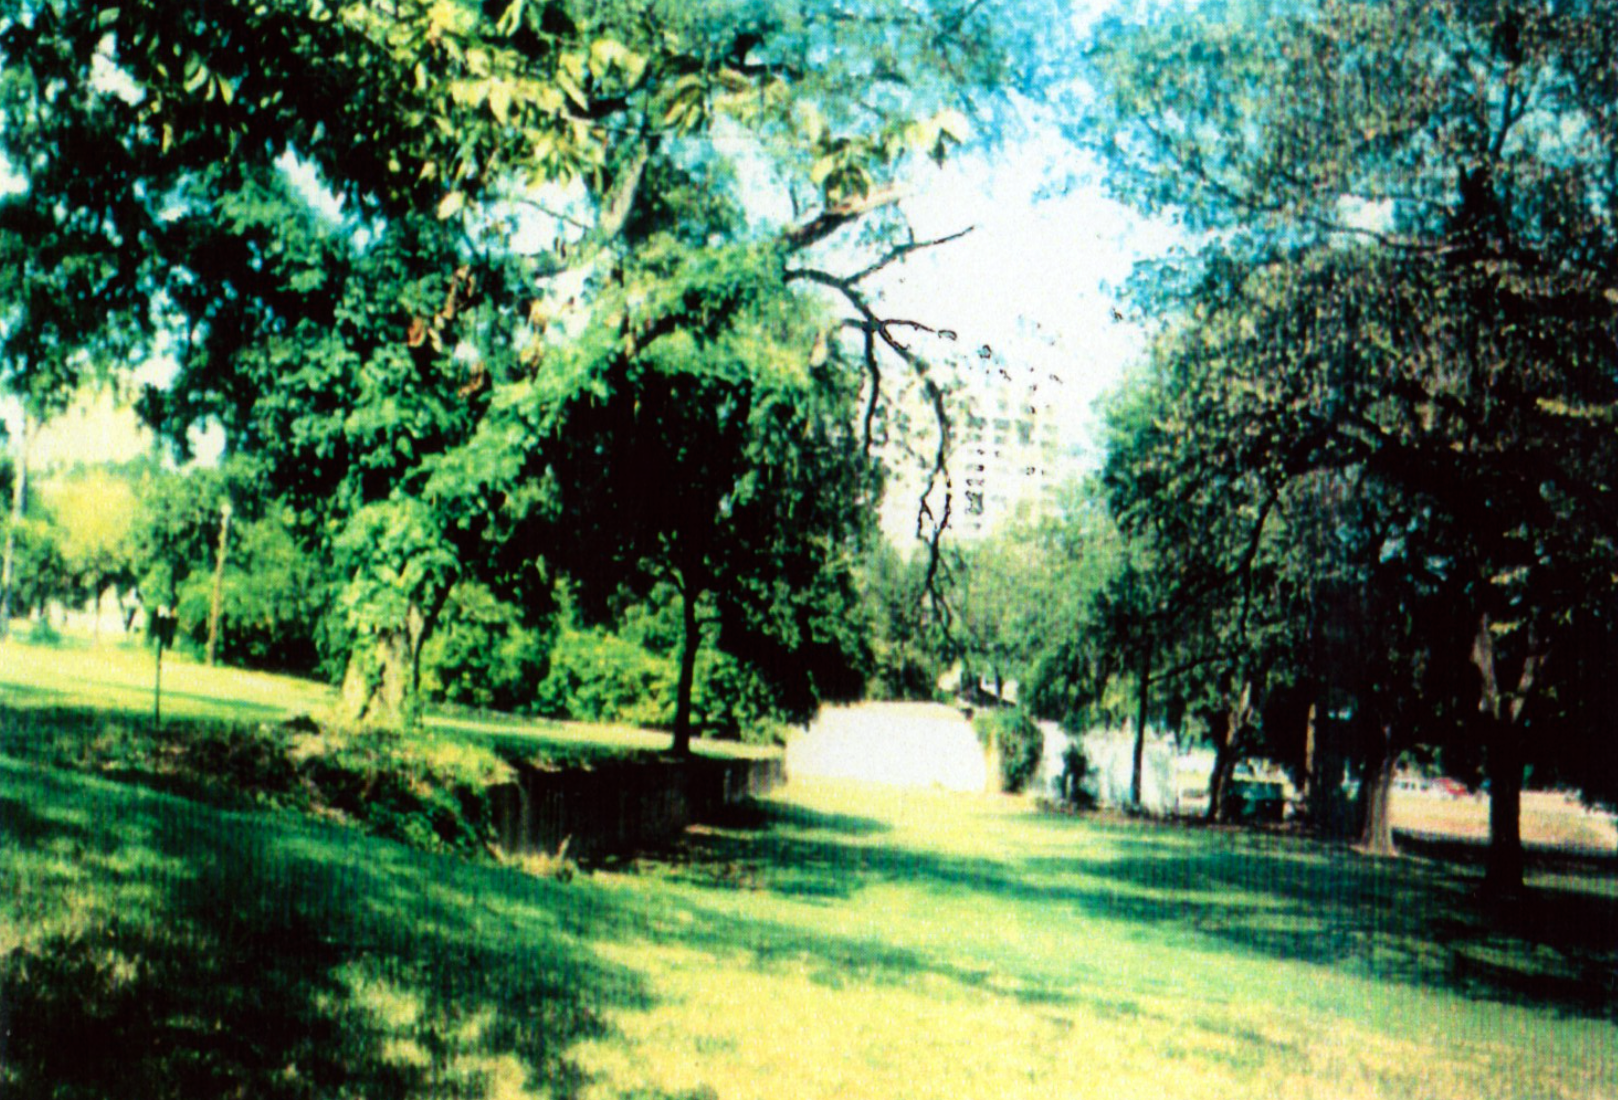 Vacant site, 1997